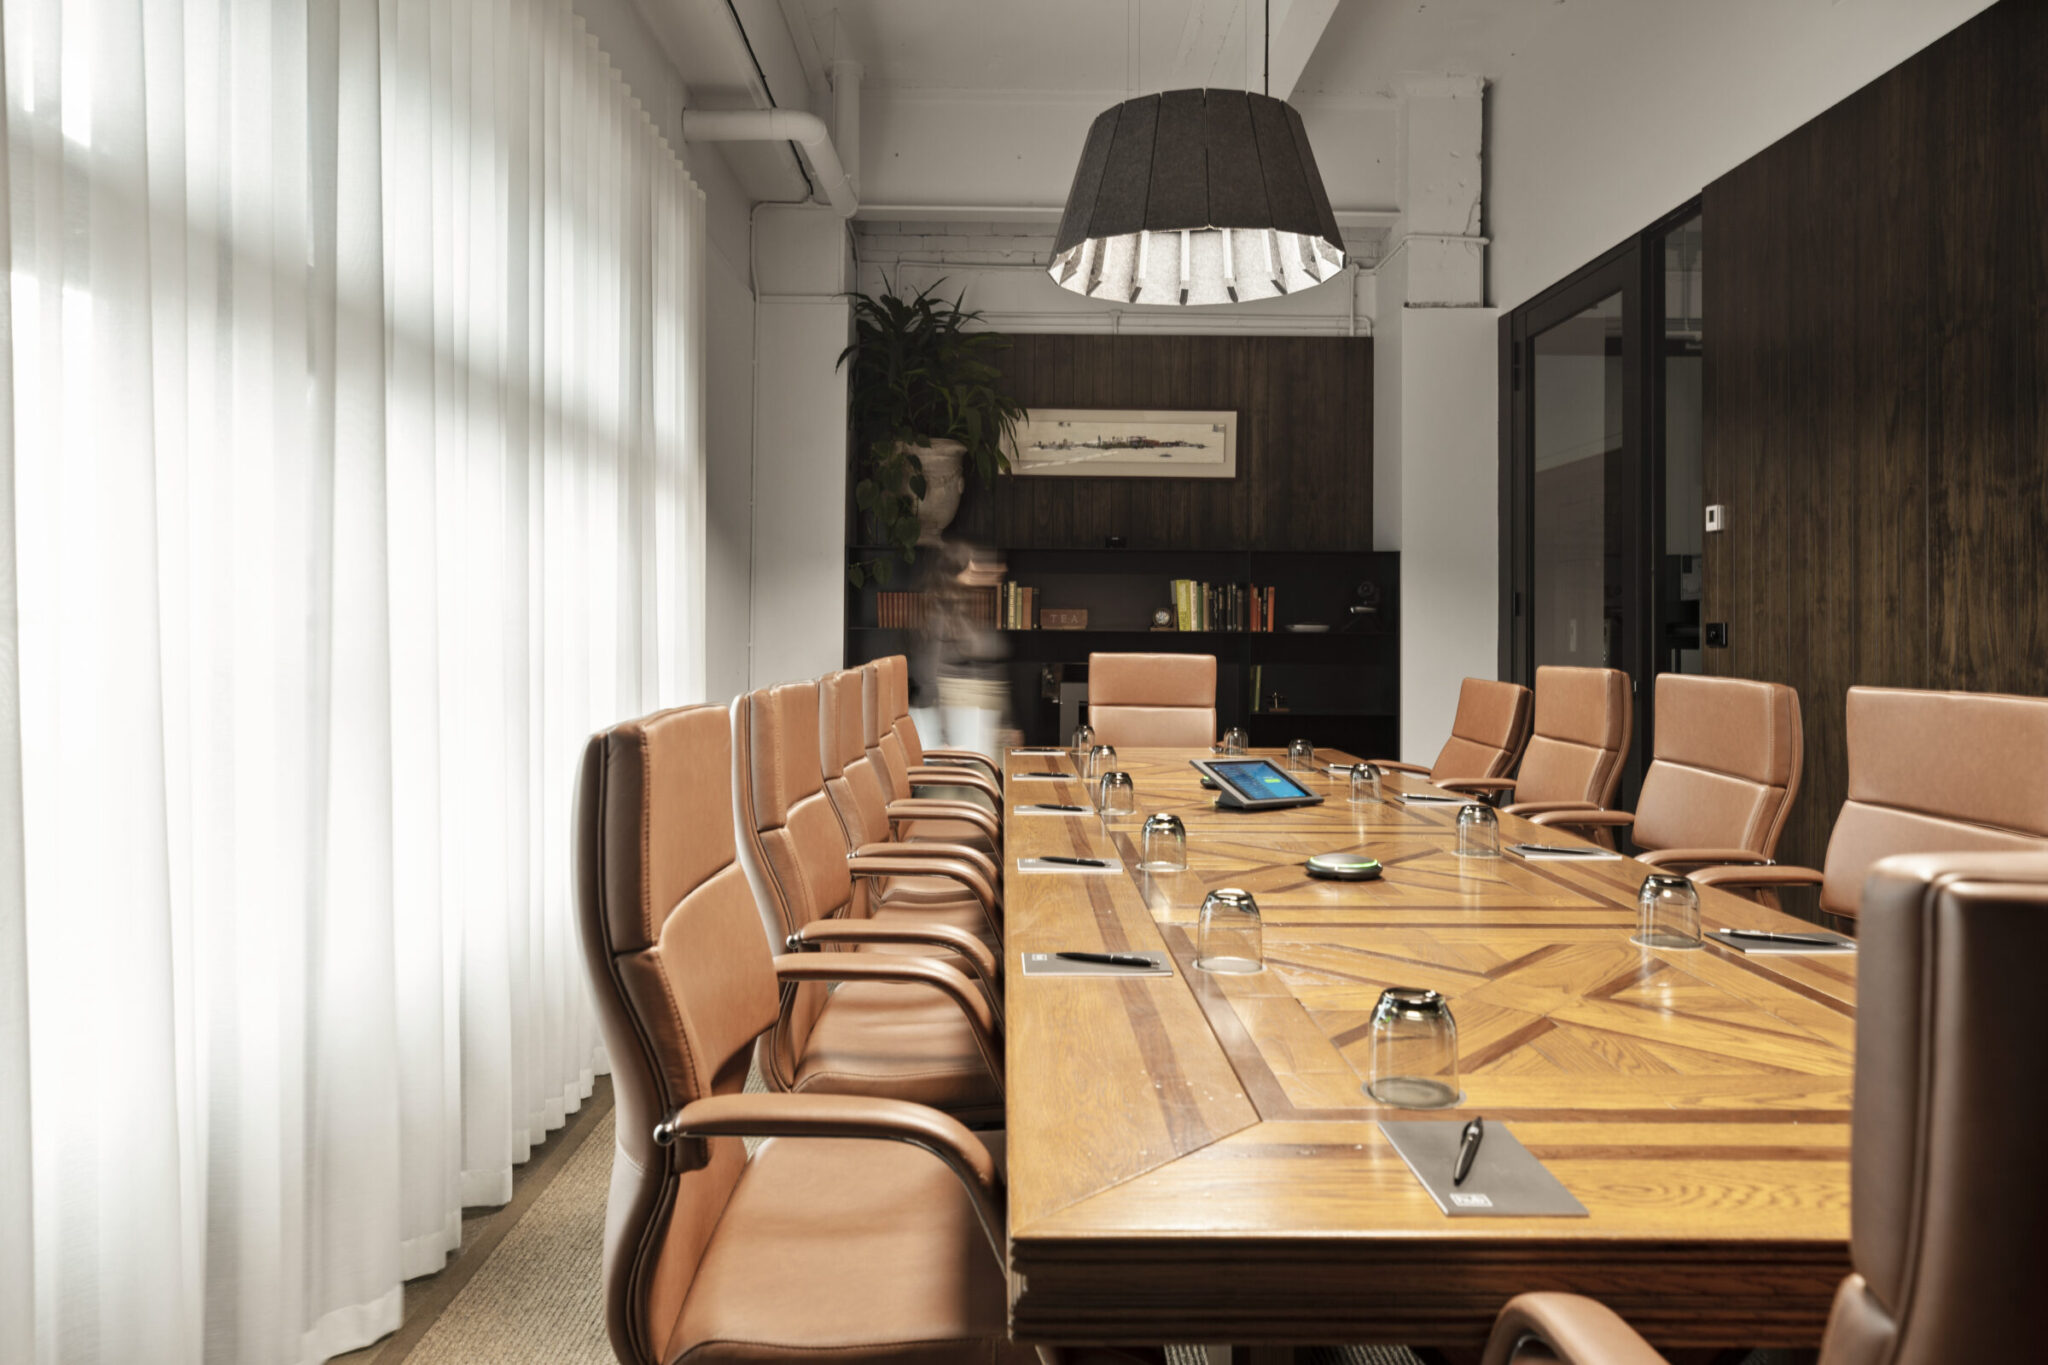  Find your Ideal Meeting or Event Space 